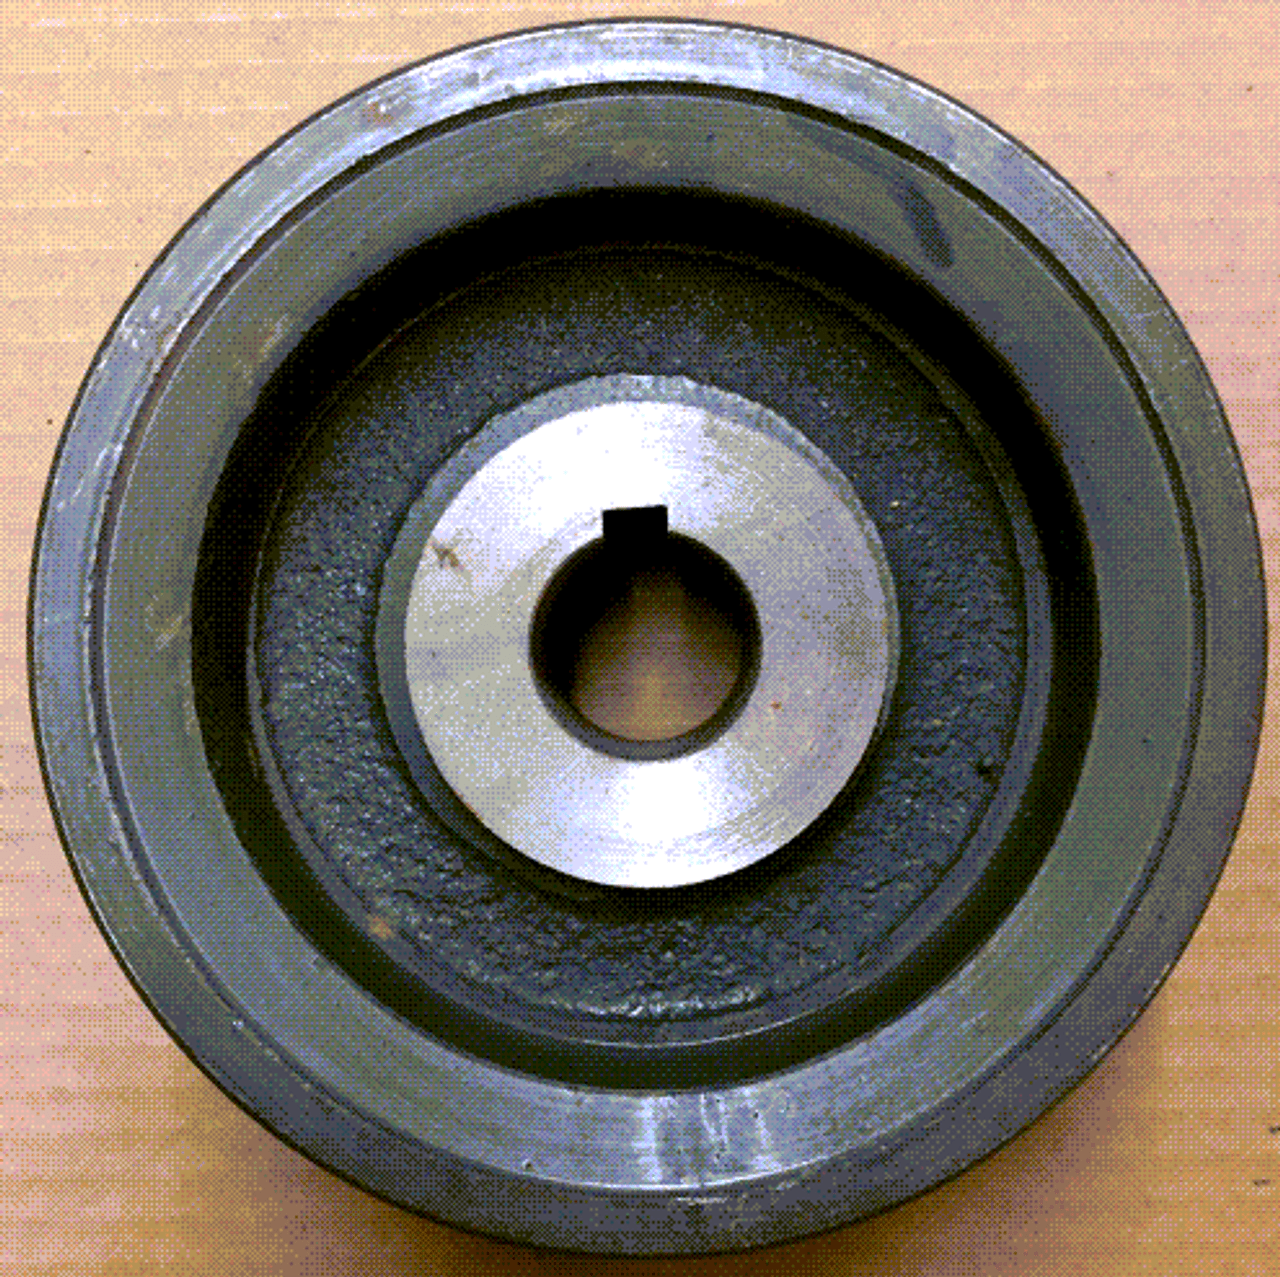 Replacement Tonutti Disc Mower Drive Pulley Code C30C0050